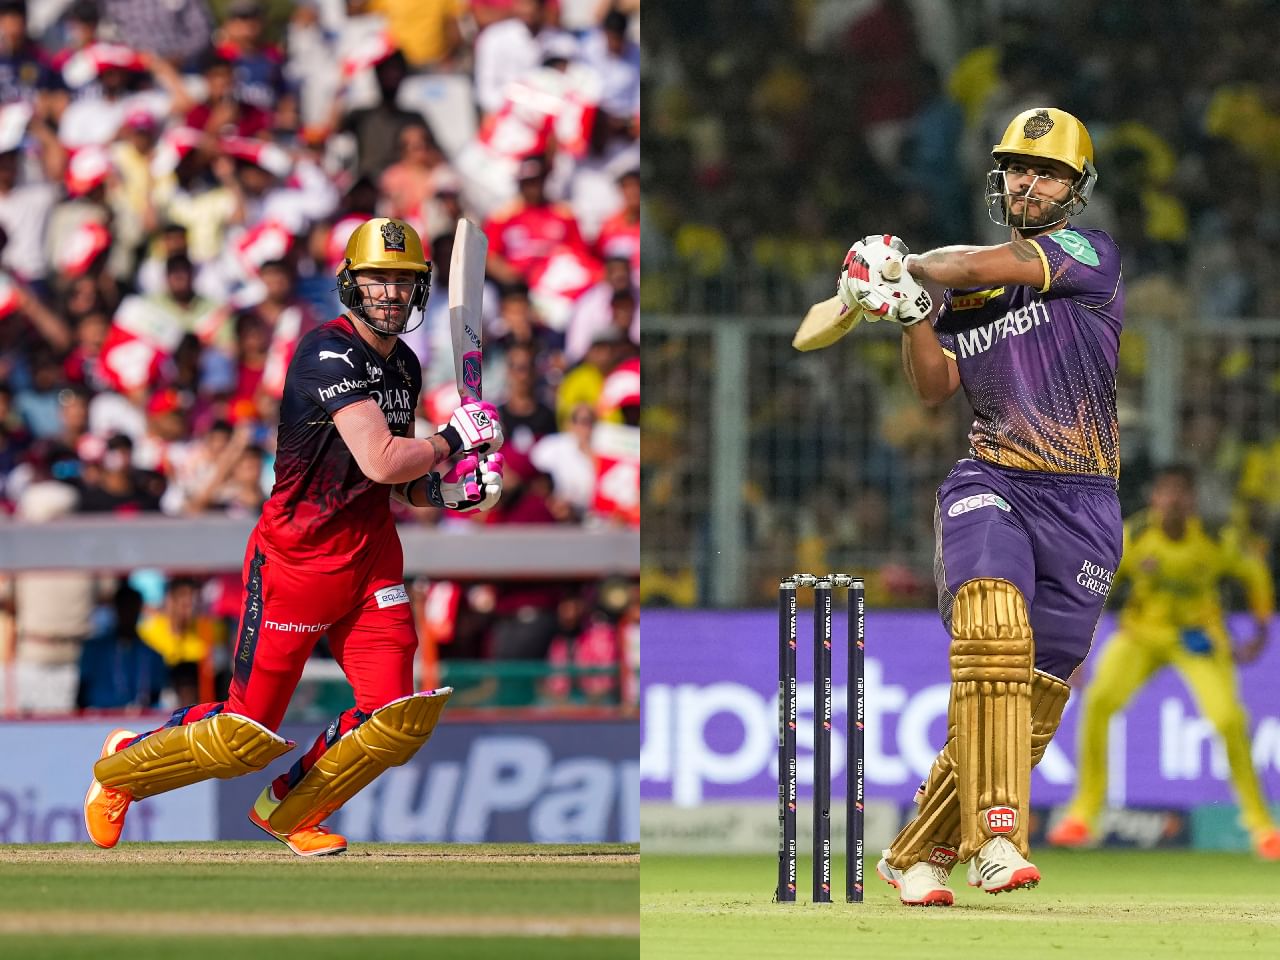 RCB vs KKR Live Score, IPL 2023: Royal Challengers Bangalore opt to bowl first at Chinnaswamy